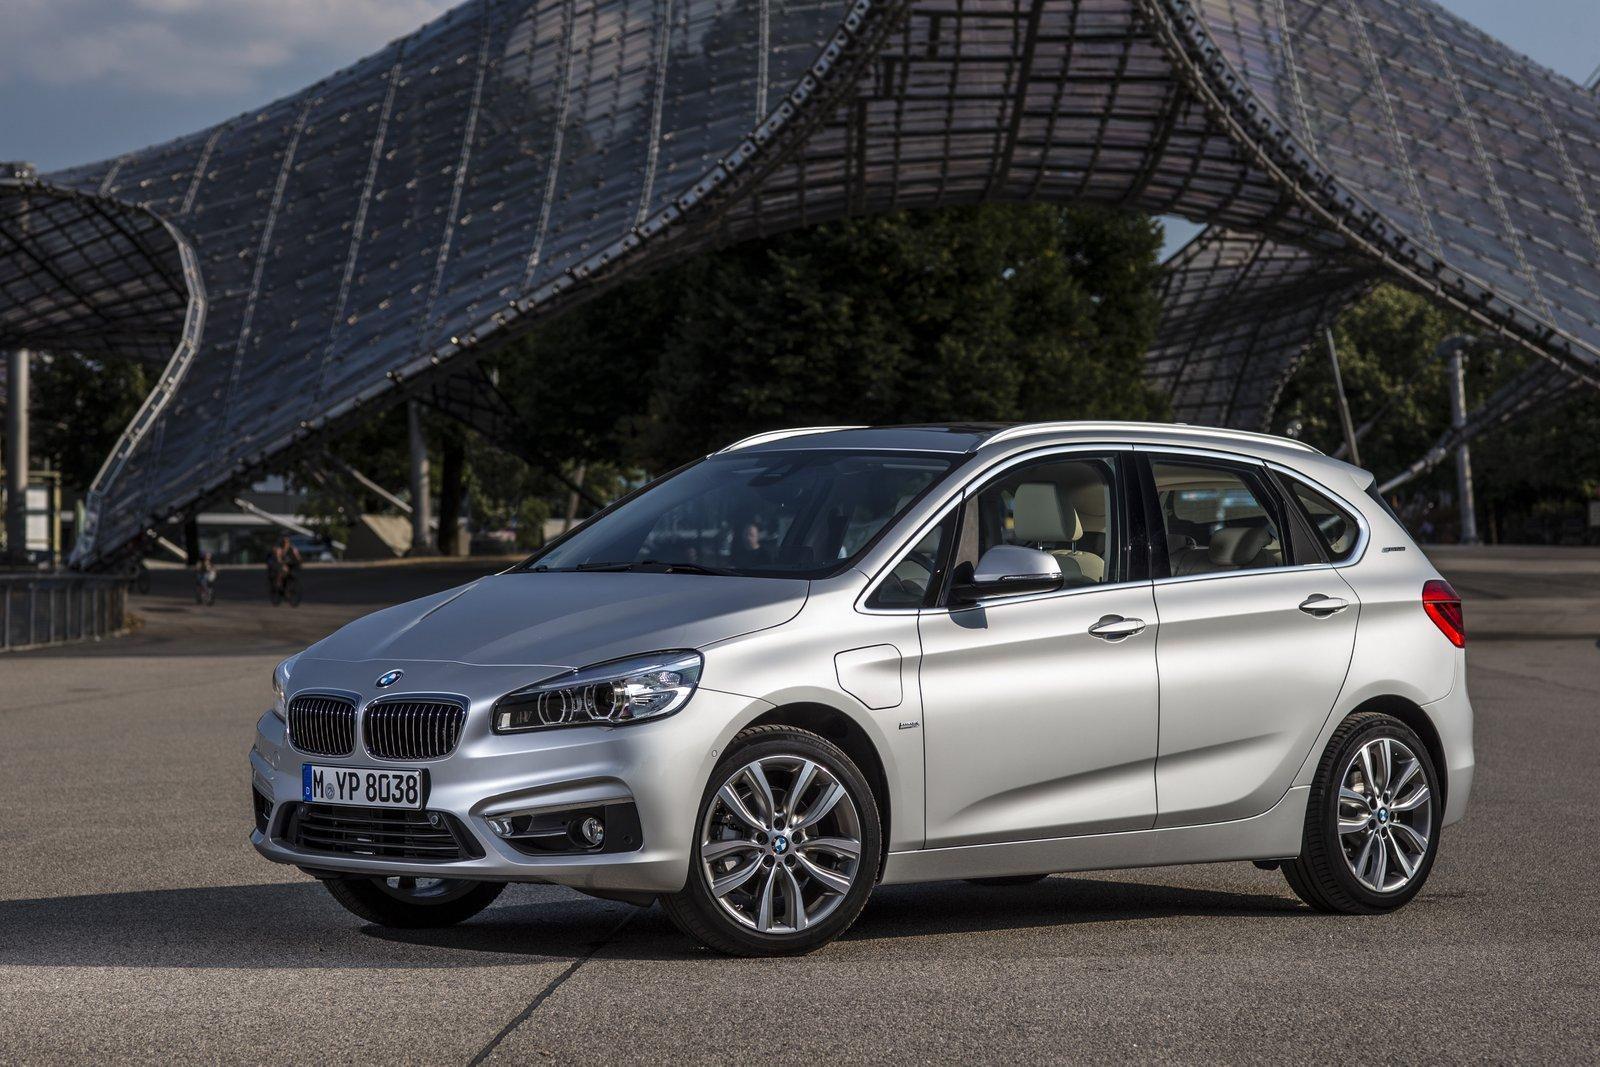 BMW 225xe Active Tourer PHEV unveiled capable of 49 98 km l